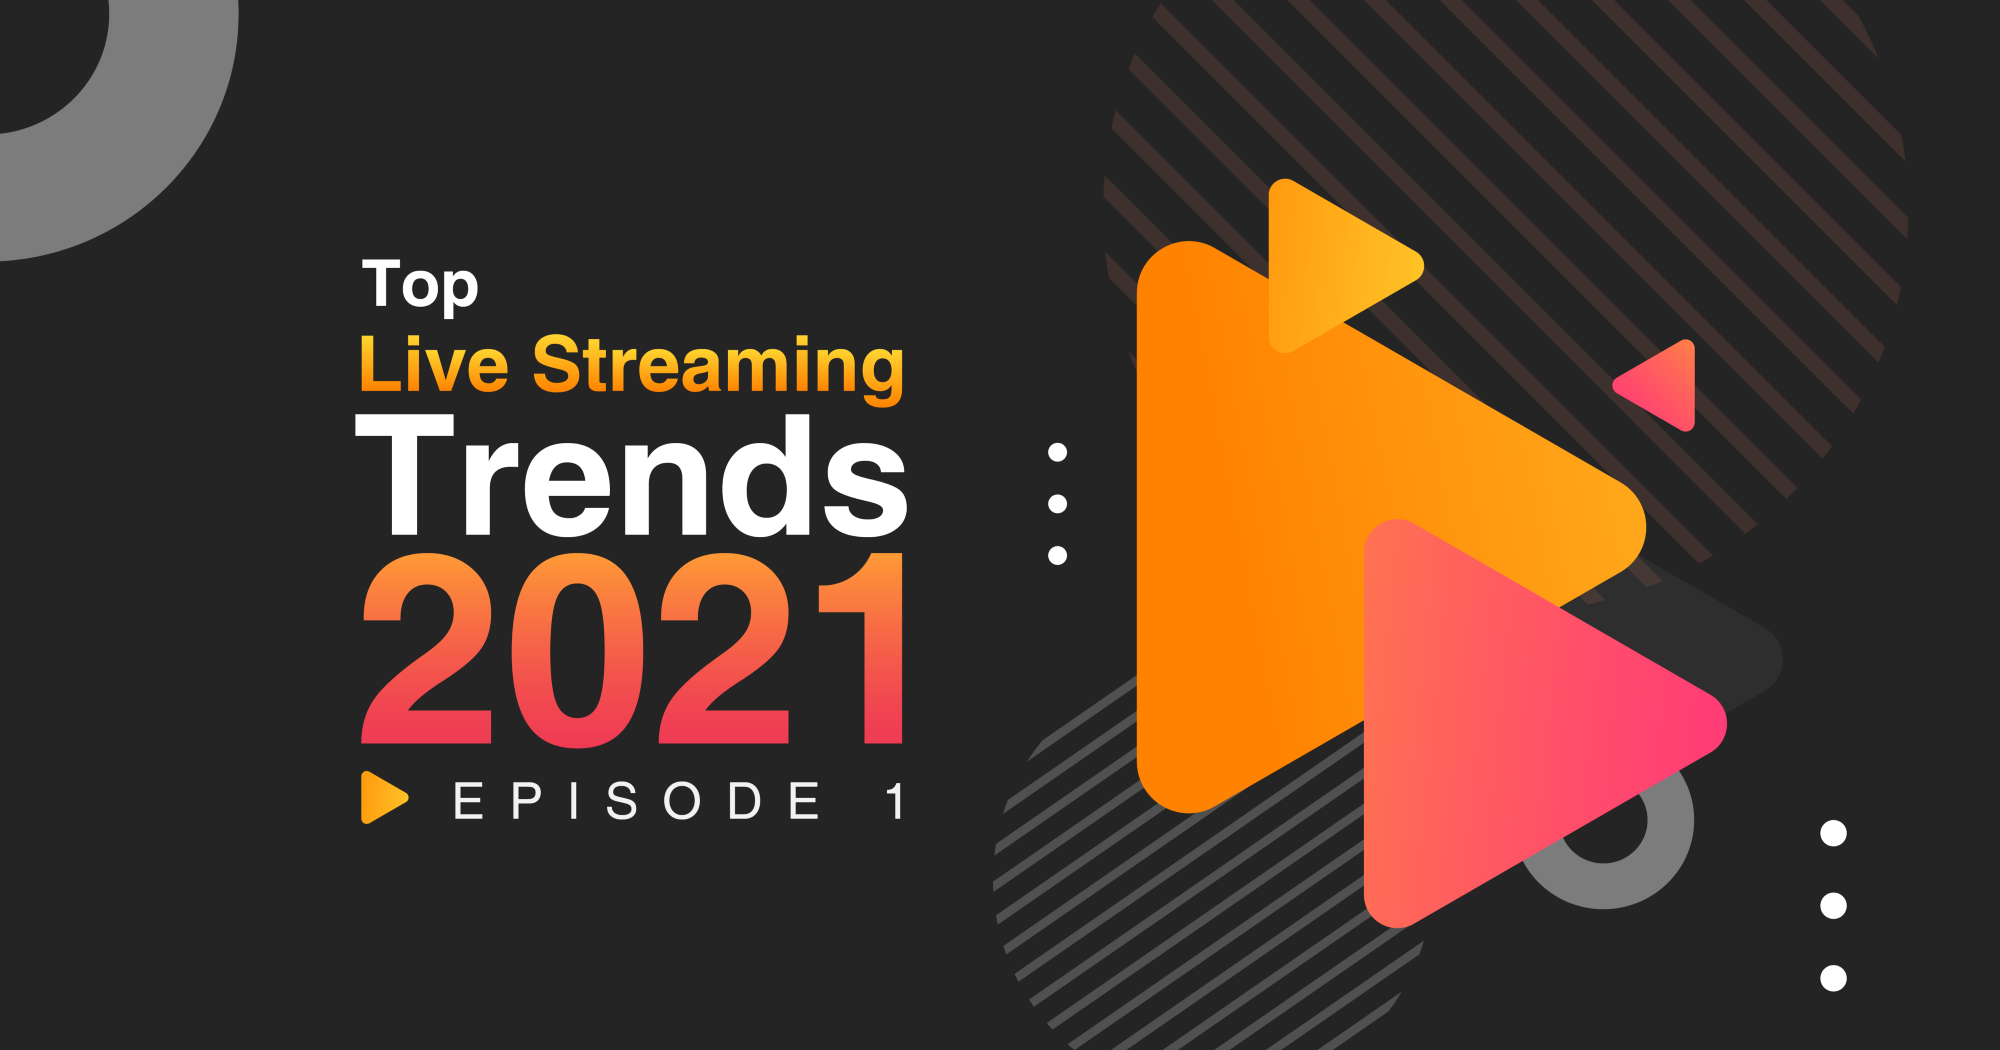 Top Live Streaming Trends 2021 - Episode 1